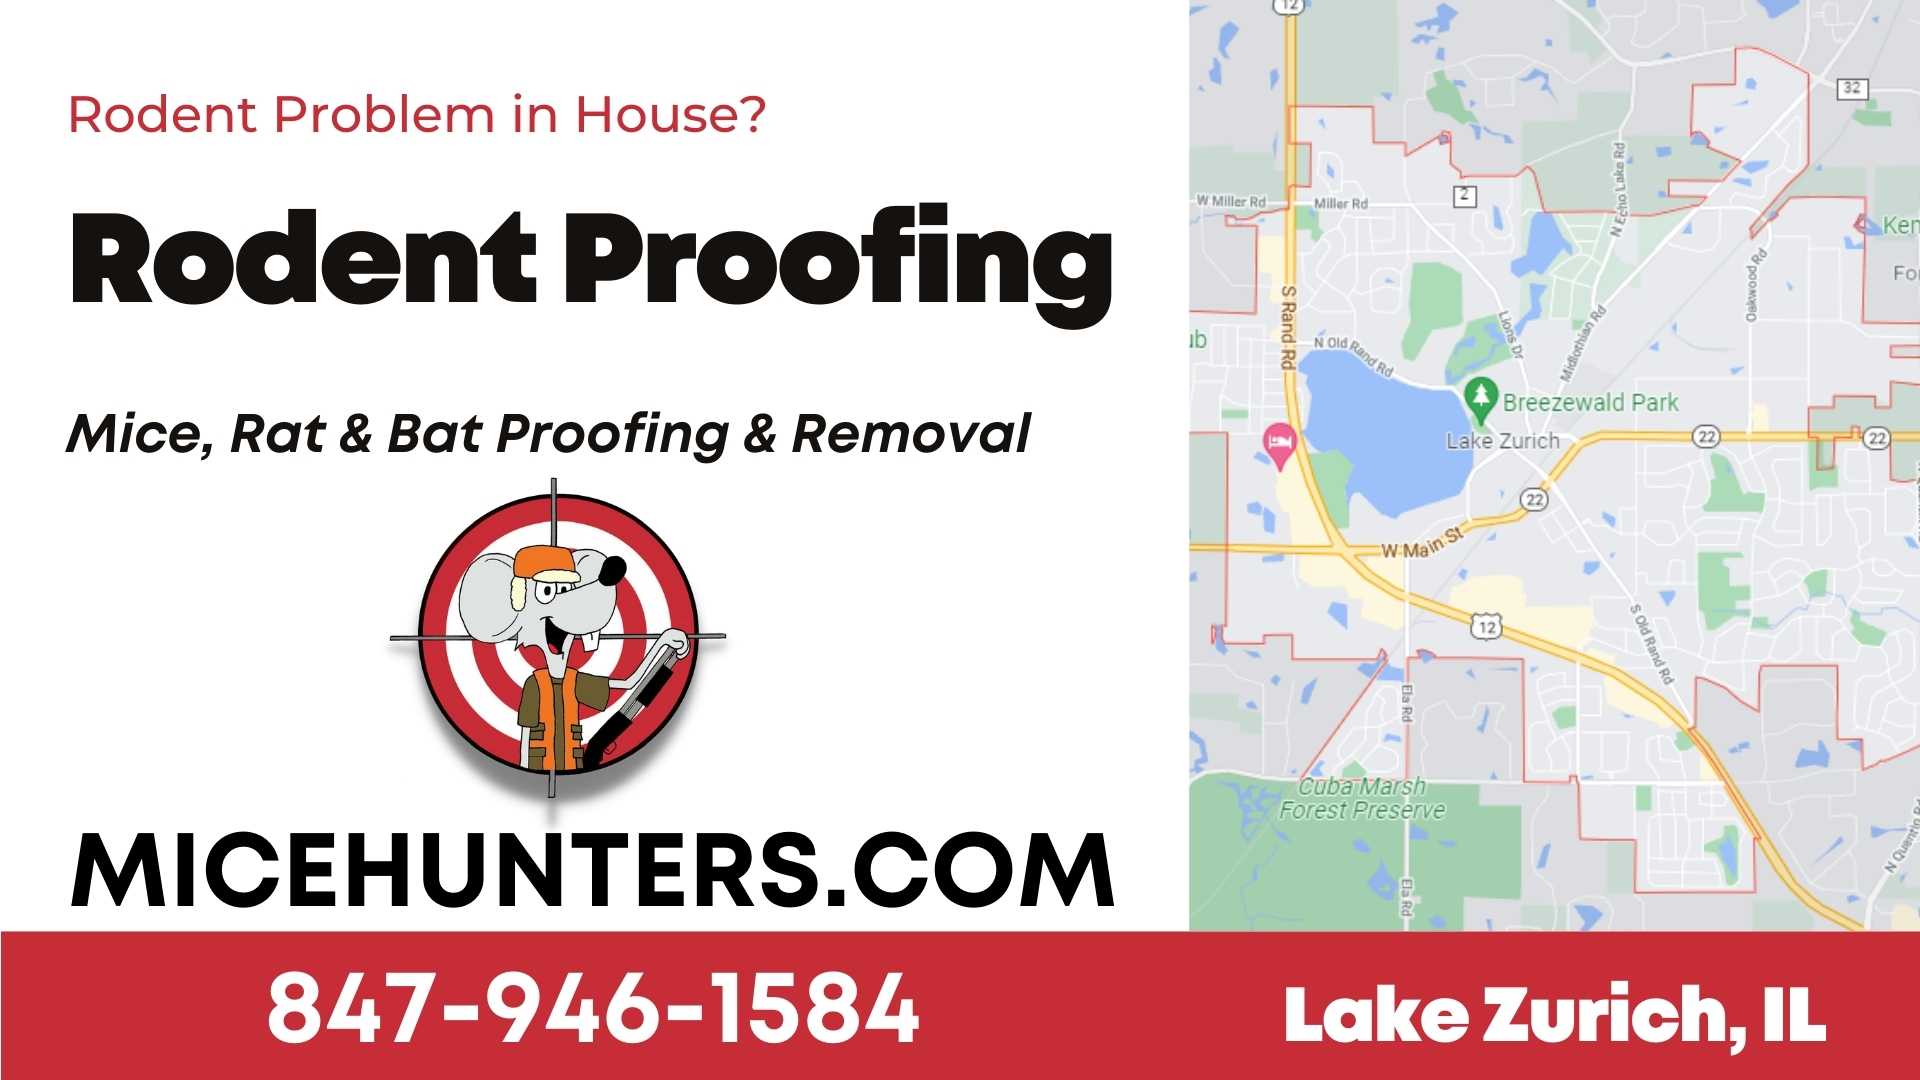 Lake Zurich Rodent and Mice Proofing Exterminator near me